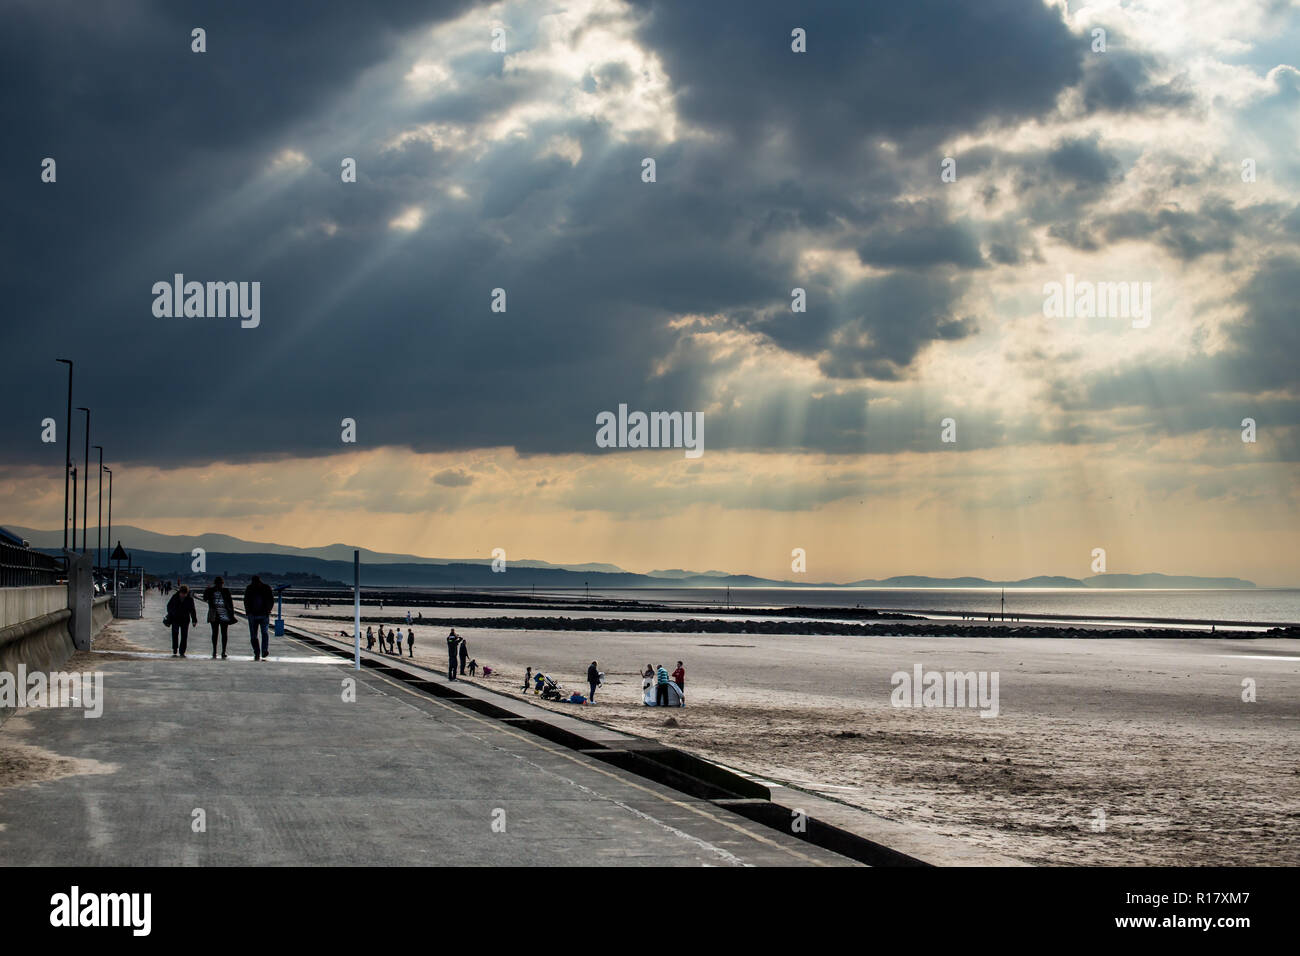 Empty beach on a gloomy moody day with sun beams coming through the stormy clouds.  Towyn town and the mountains of Snowdonia are visible. Stock Photo